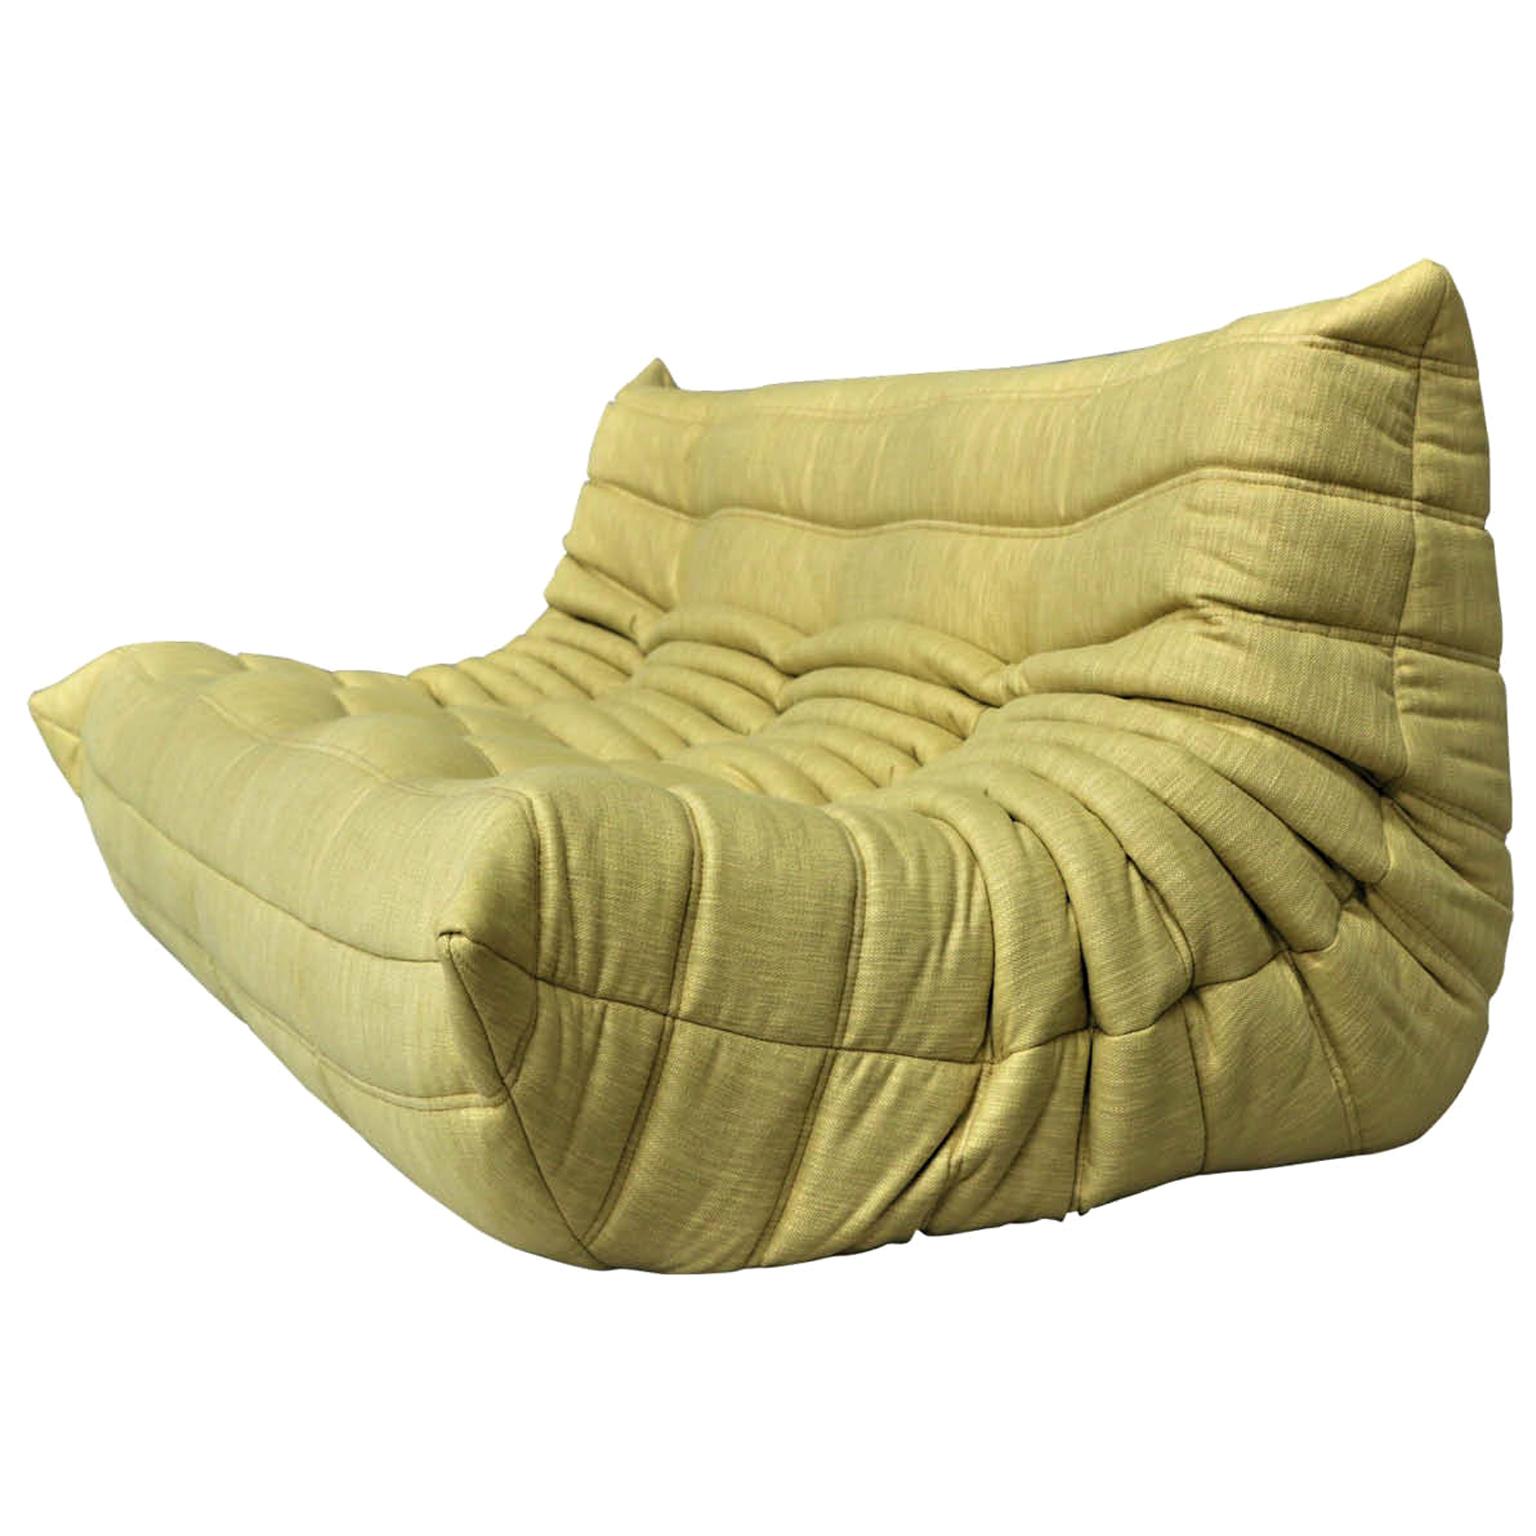 CERTIFIED Ligne Roset TOGO 3-Seat in Durable Chartreuse Fabric, DIAMOND QUALITY For Sale